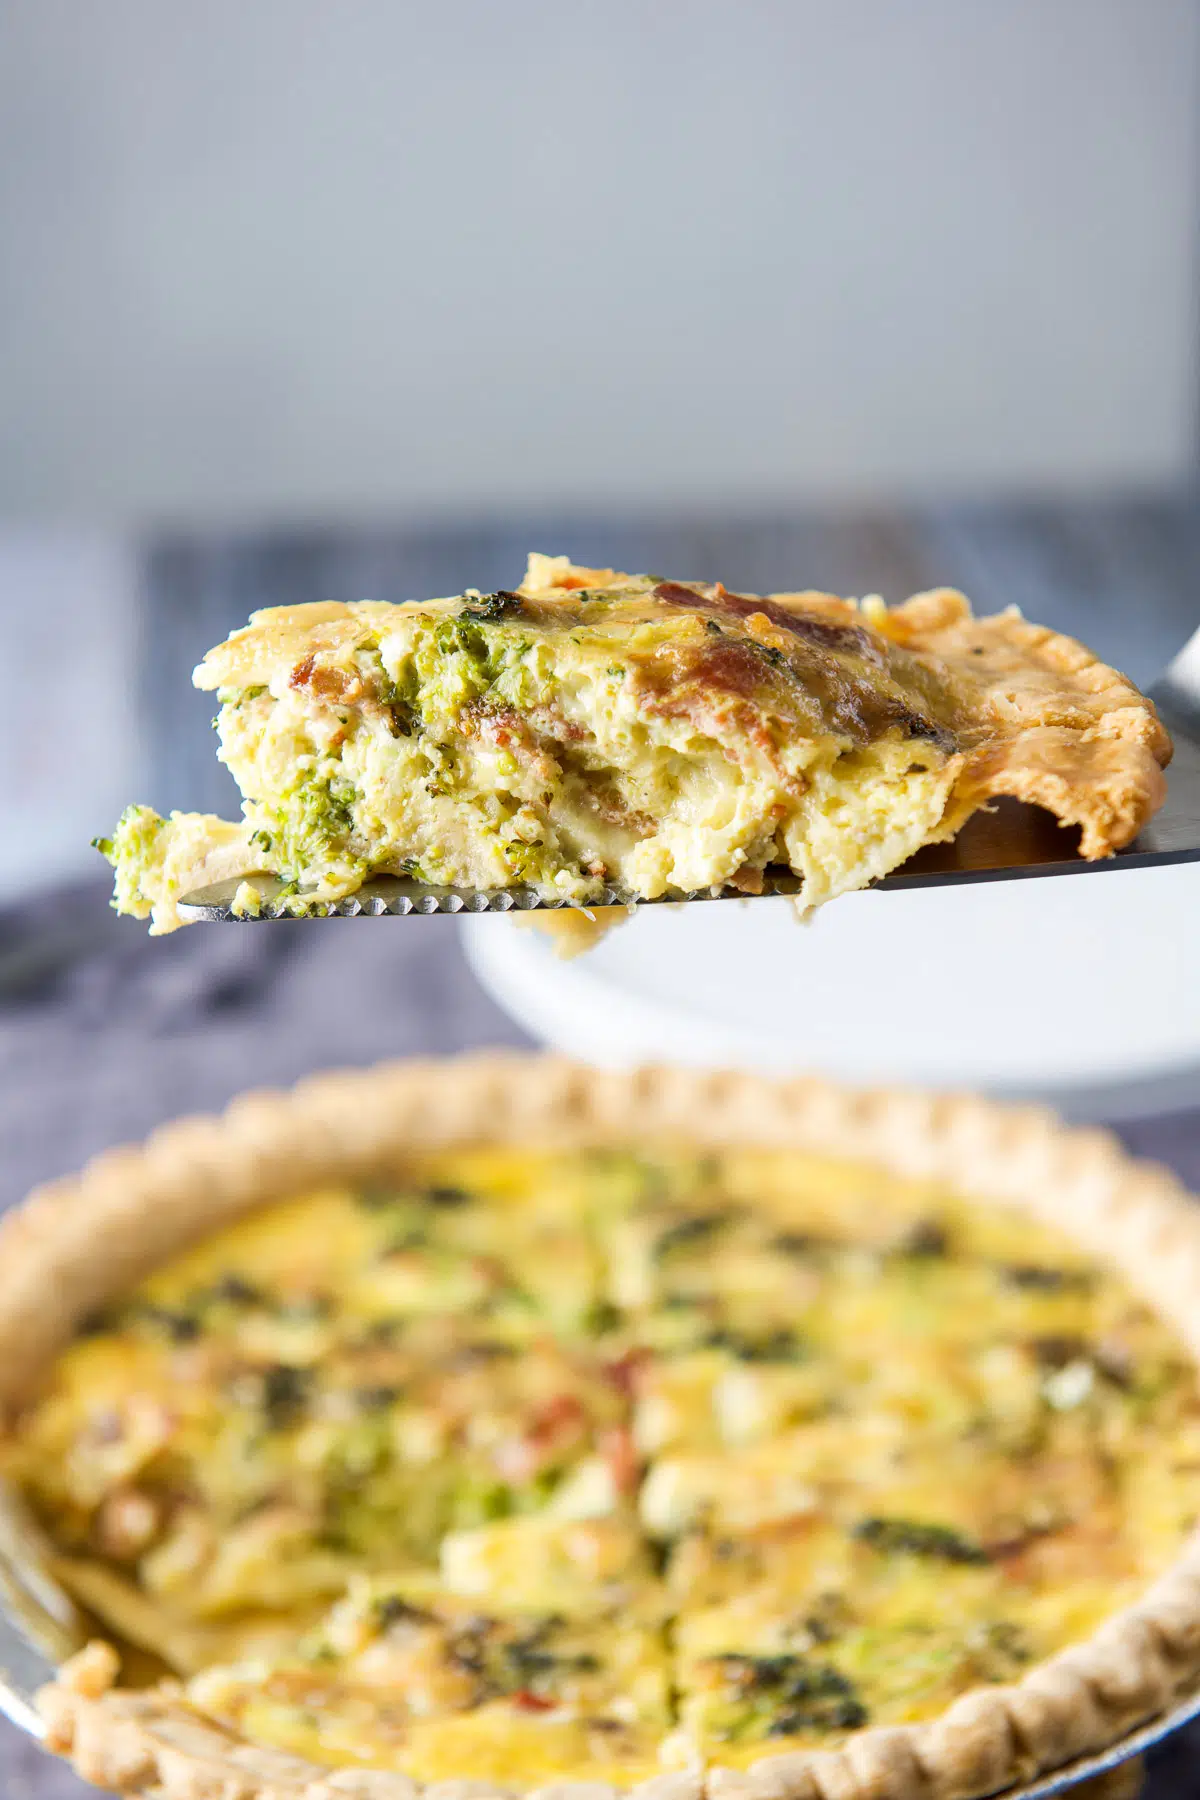 A slice of quiche on a server held over the pie